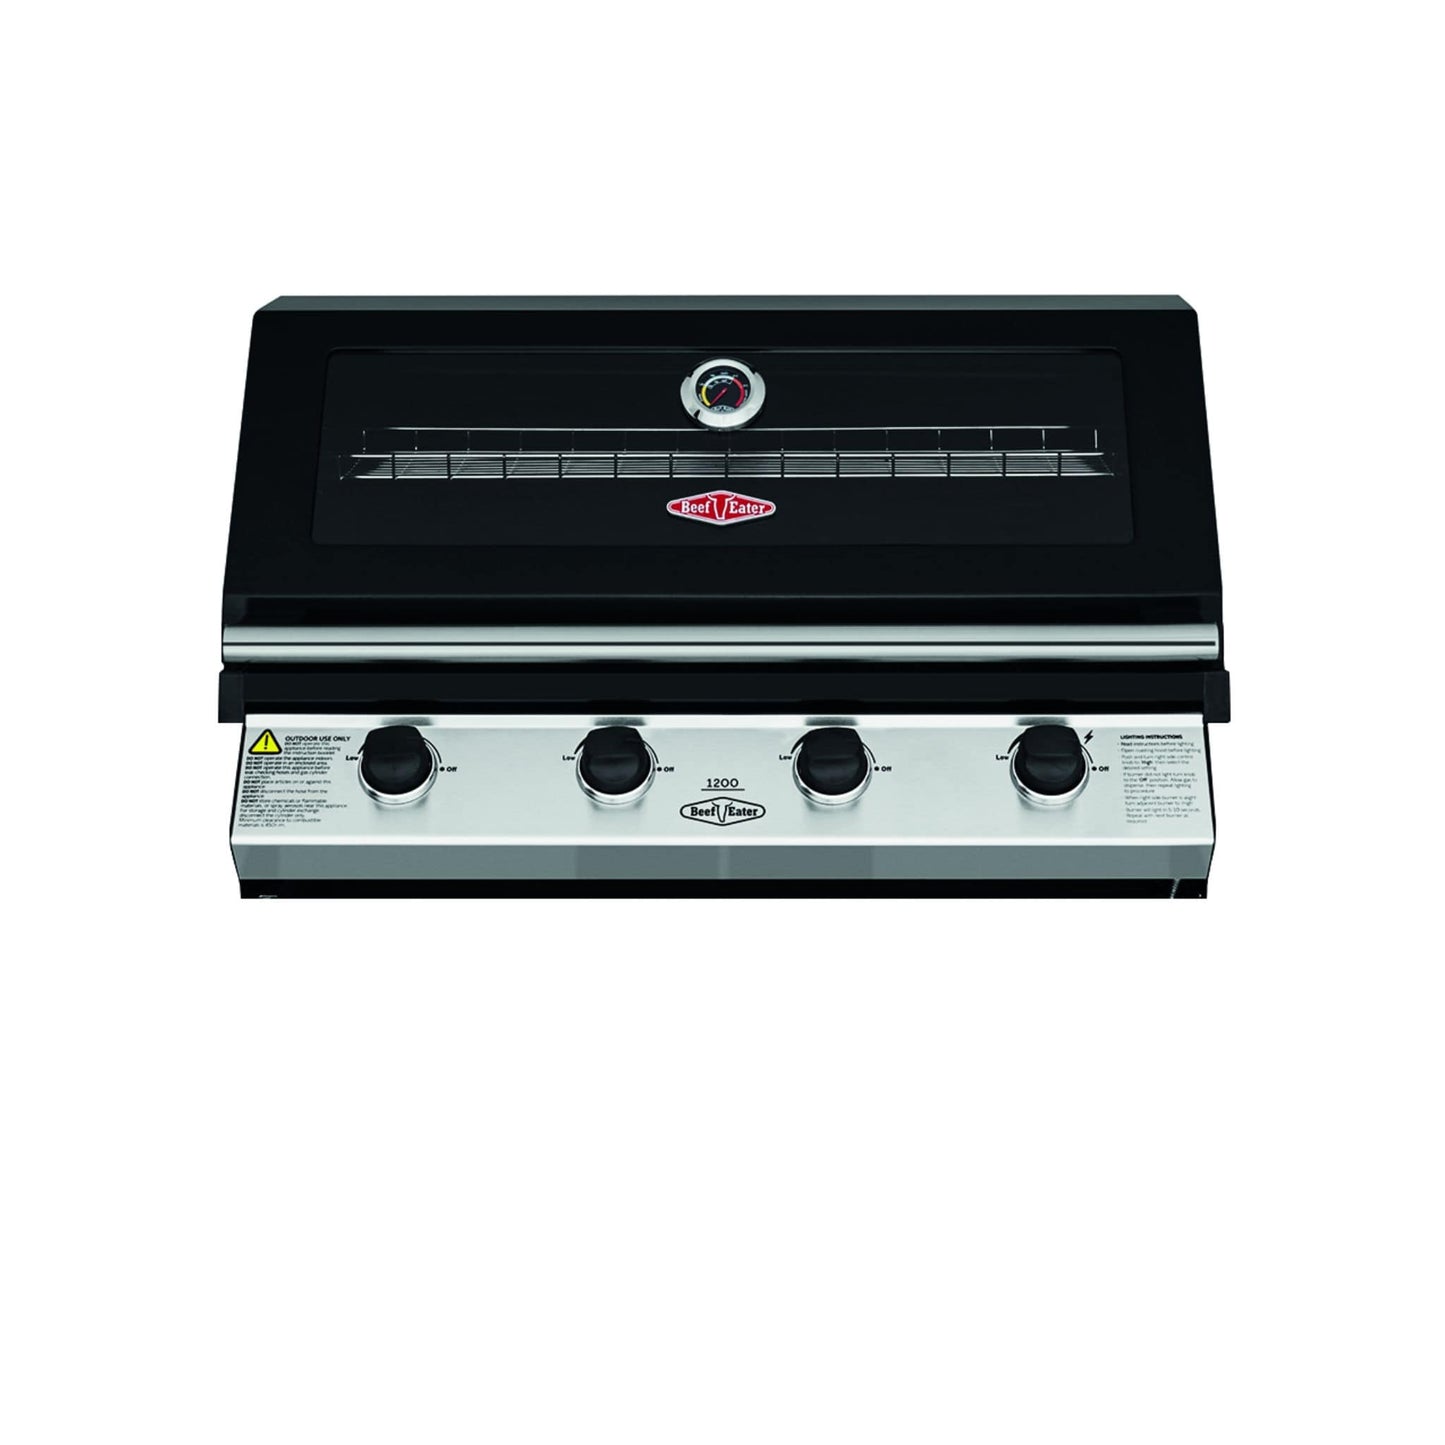 BeefEater 1200E Series Built-In 4 Burner Barbecue